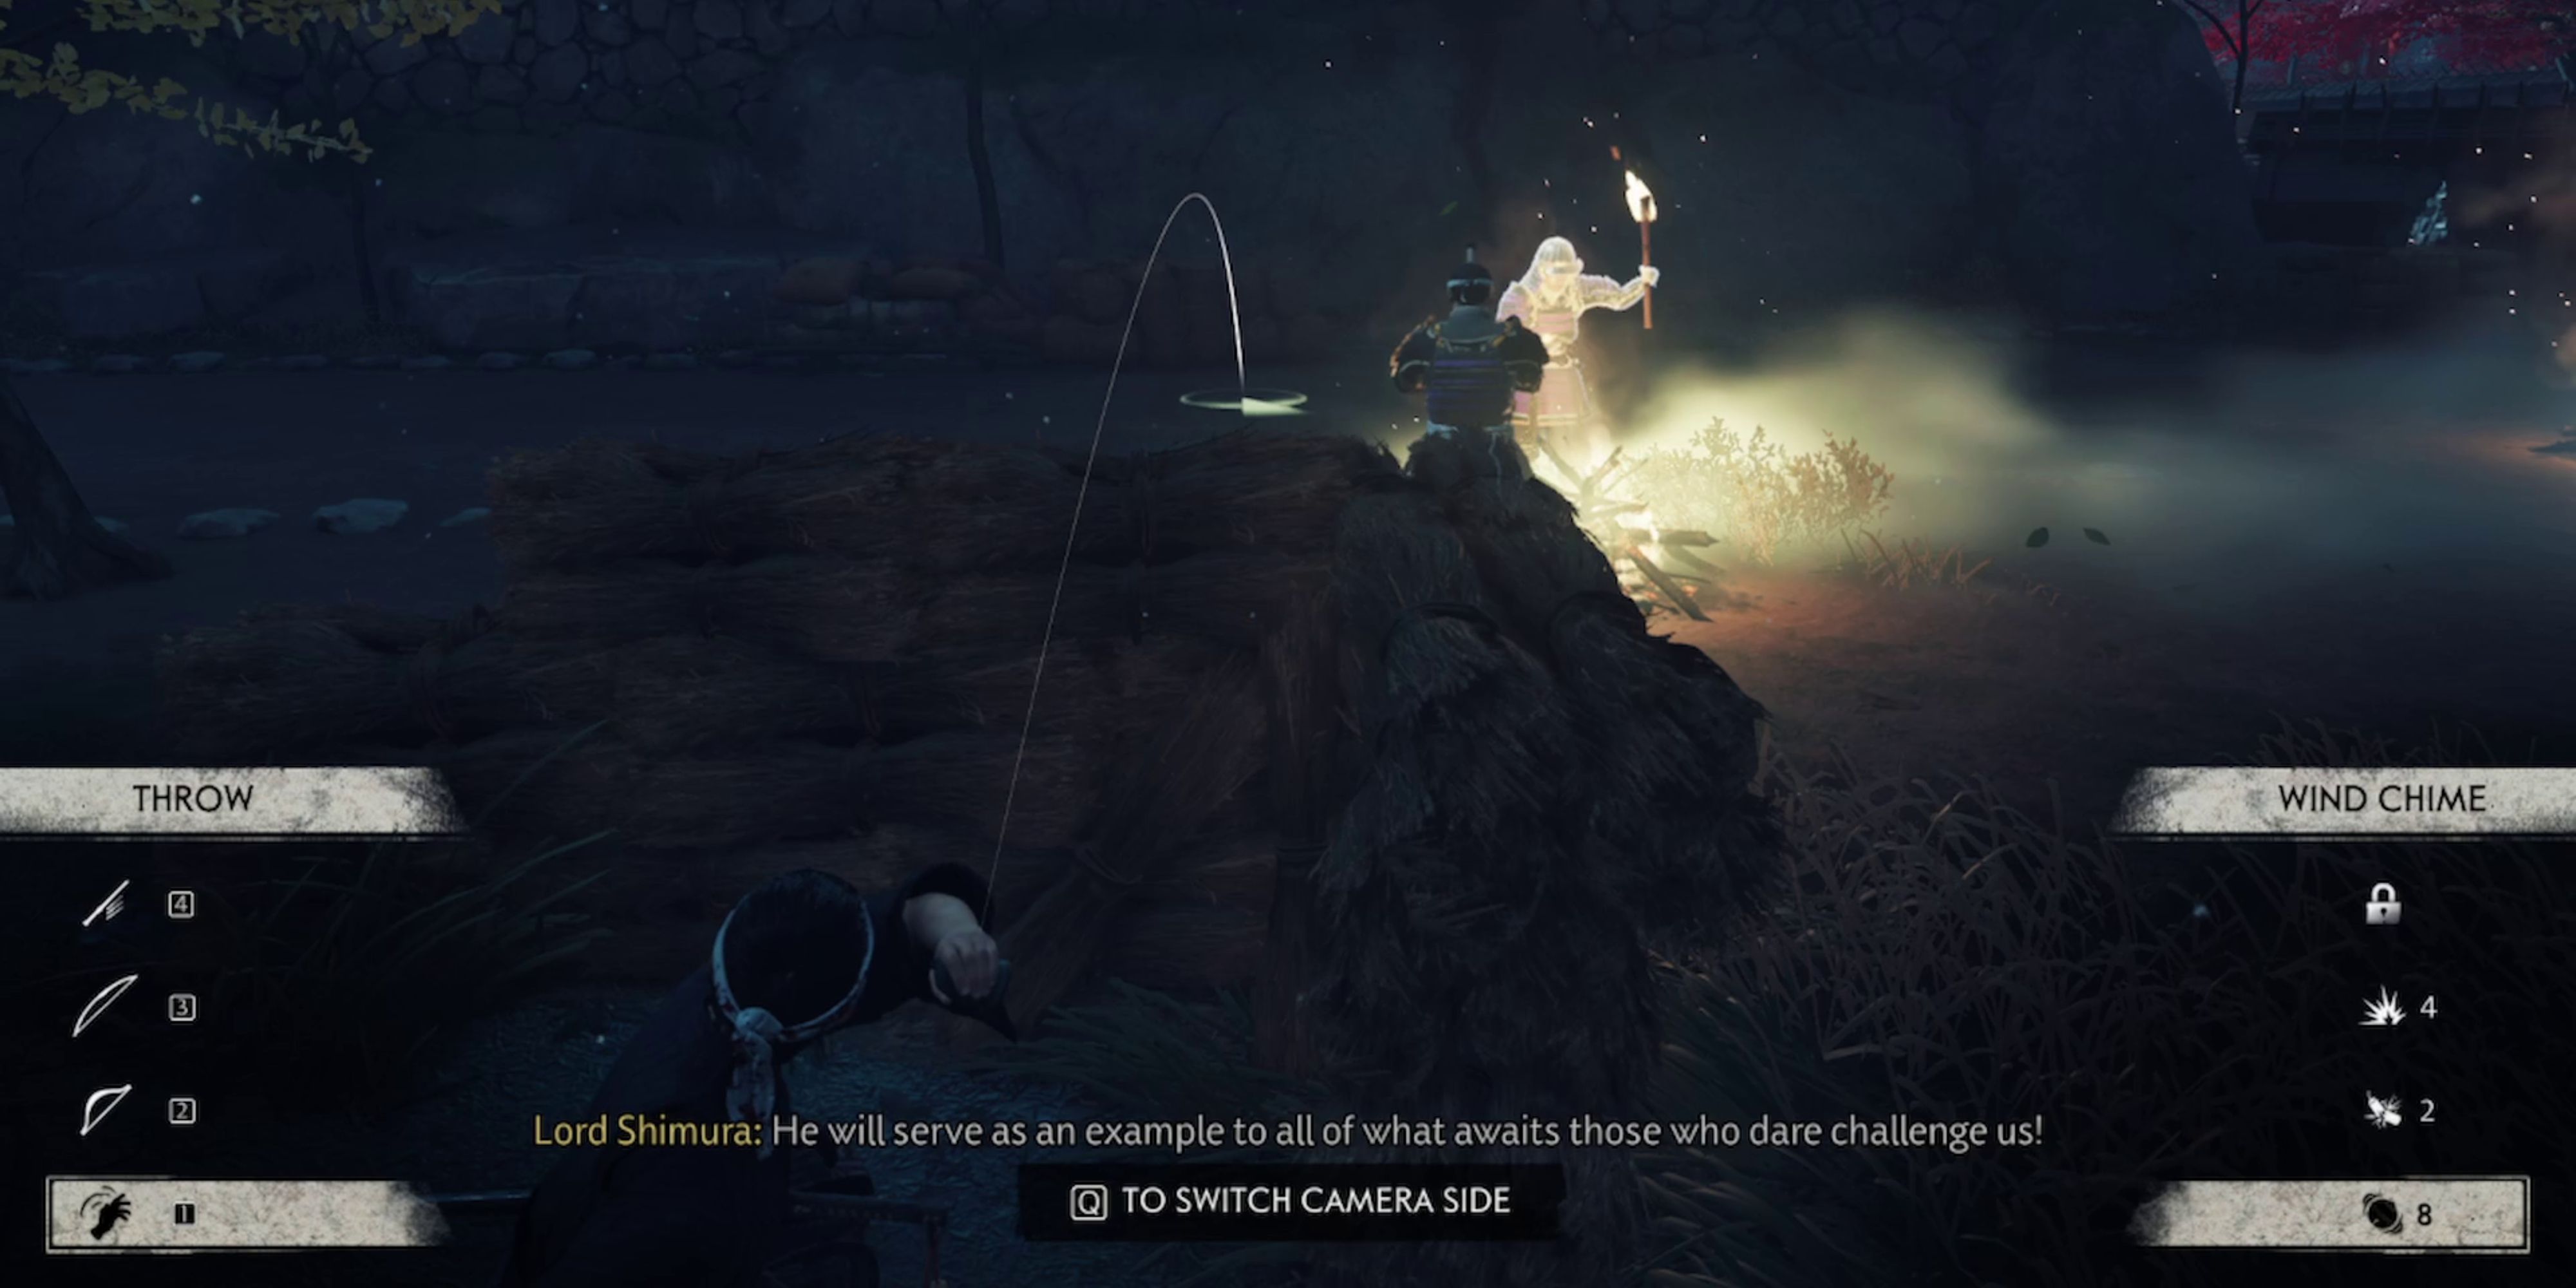 using wind chime in ghost of tsushima